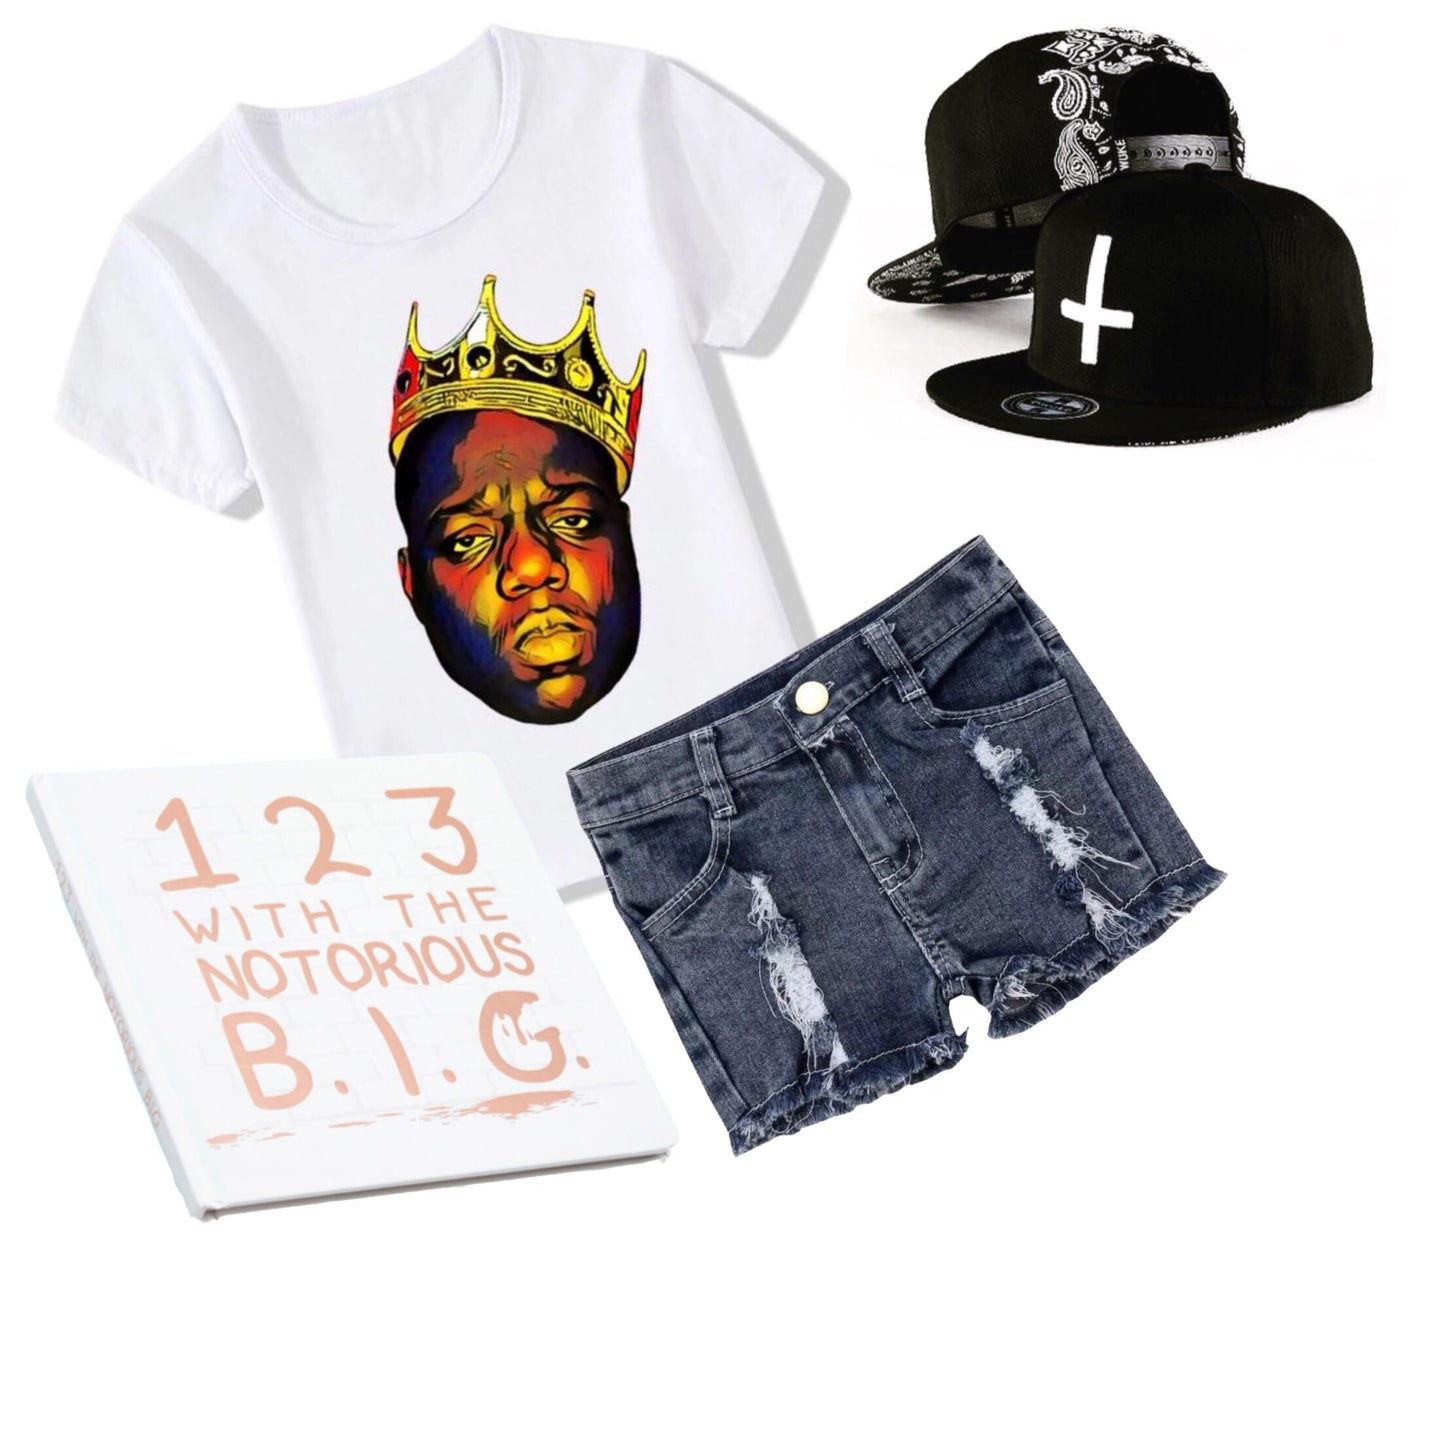 123 with the notorious BIG book- The Little Homie - nixonscloset